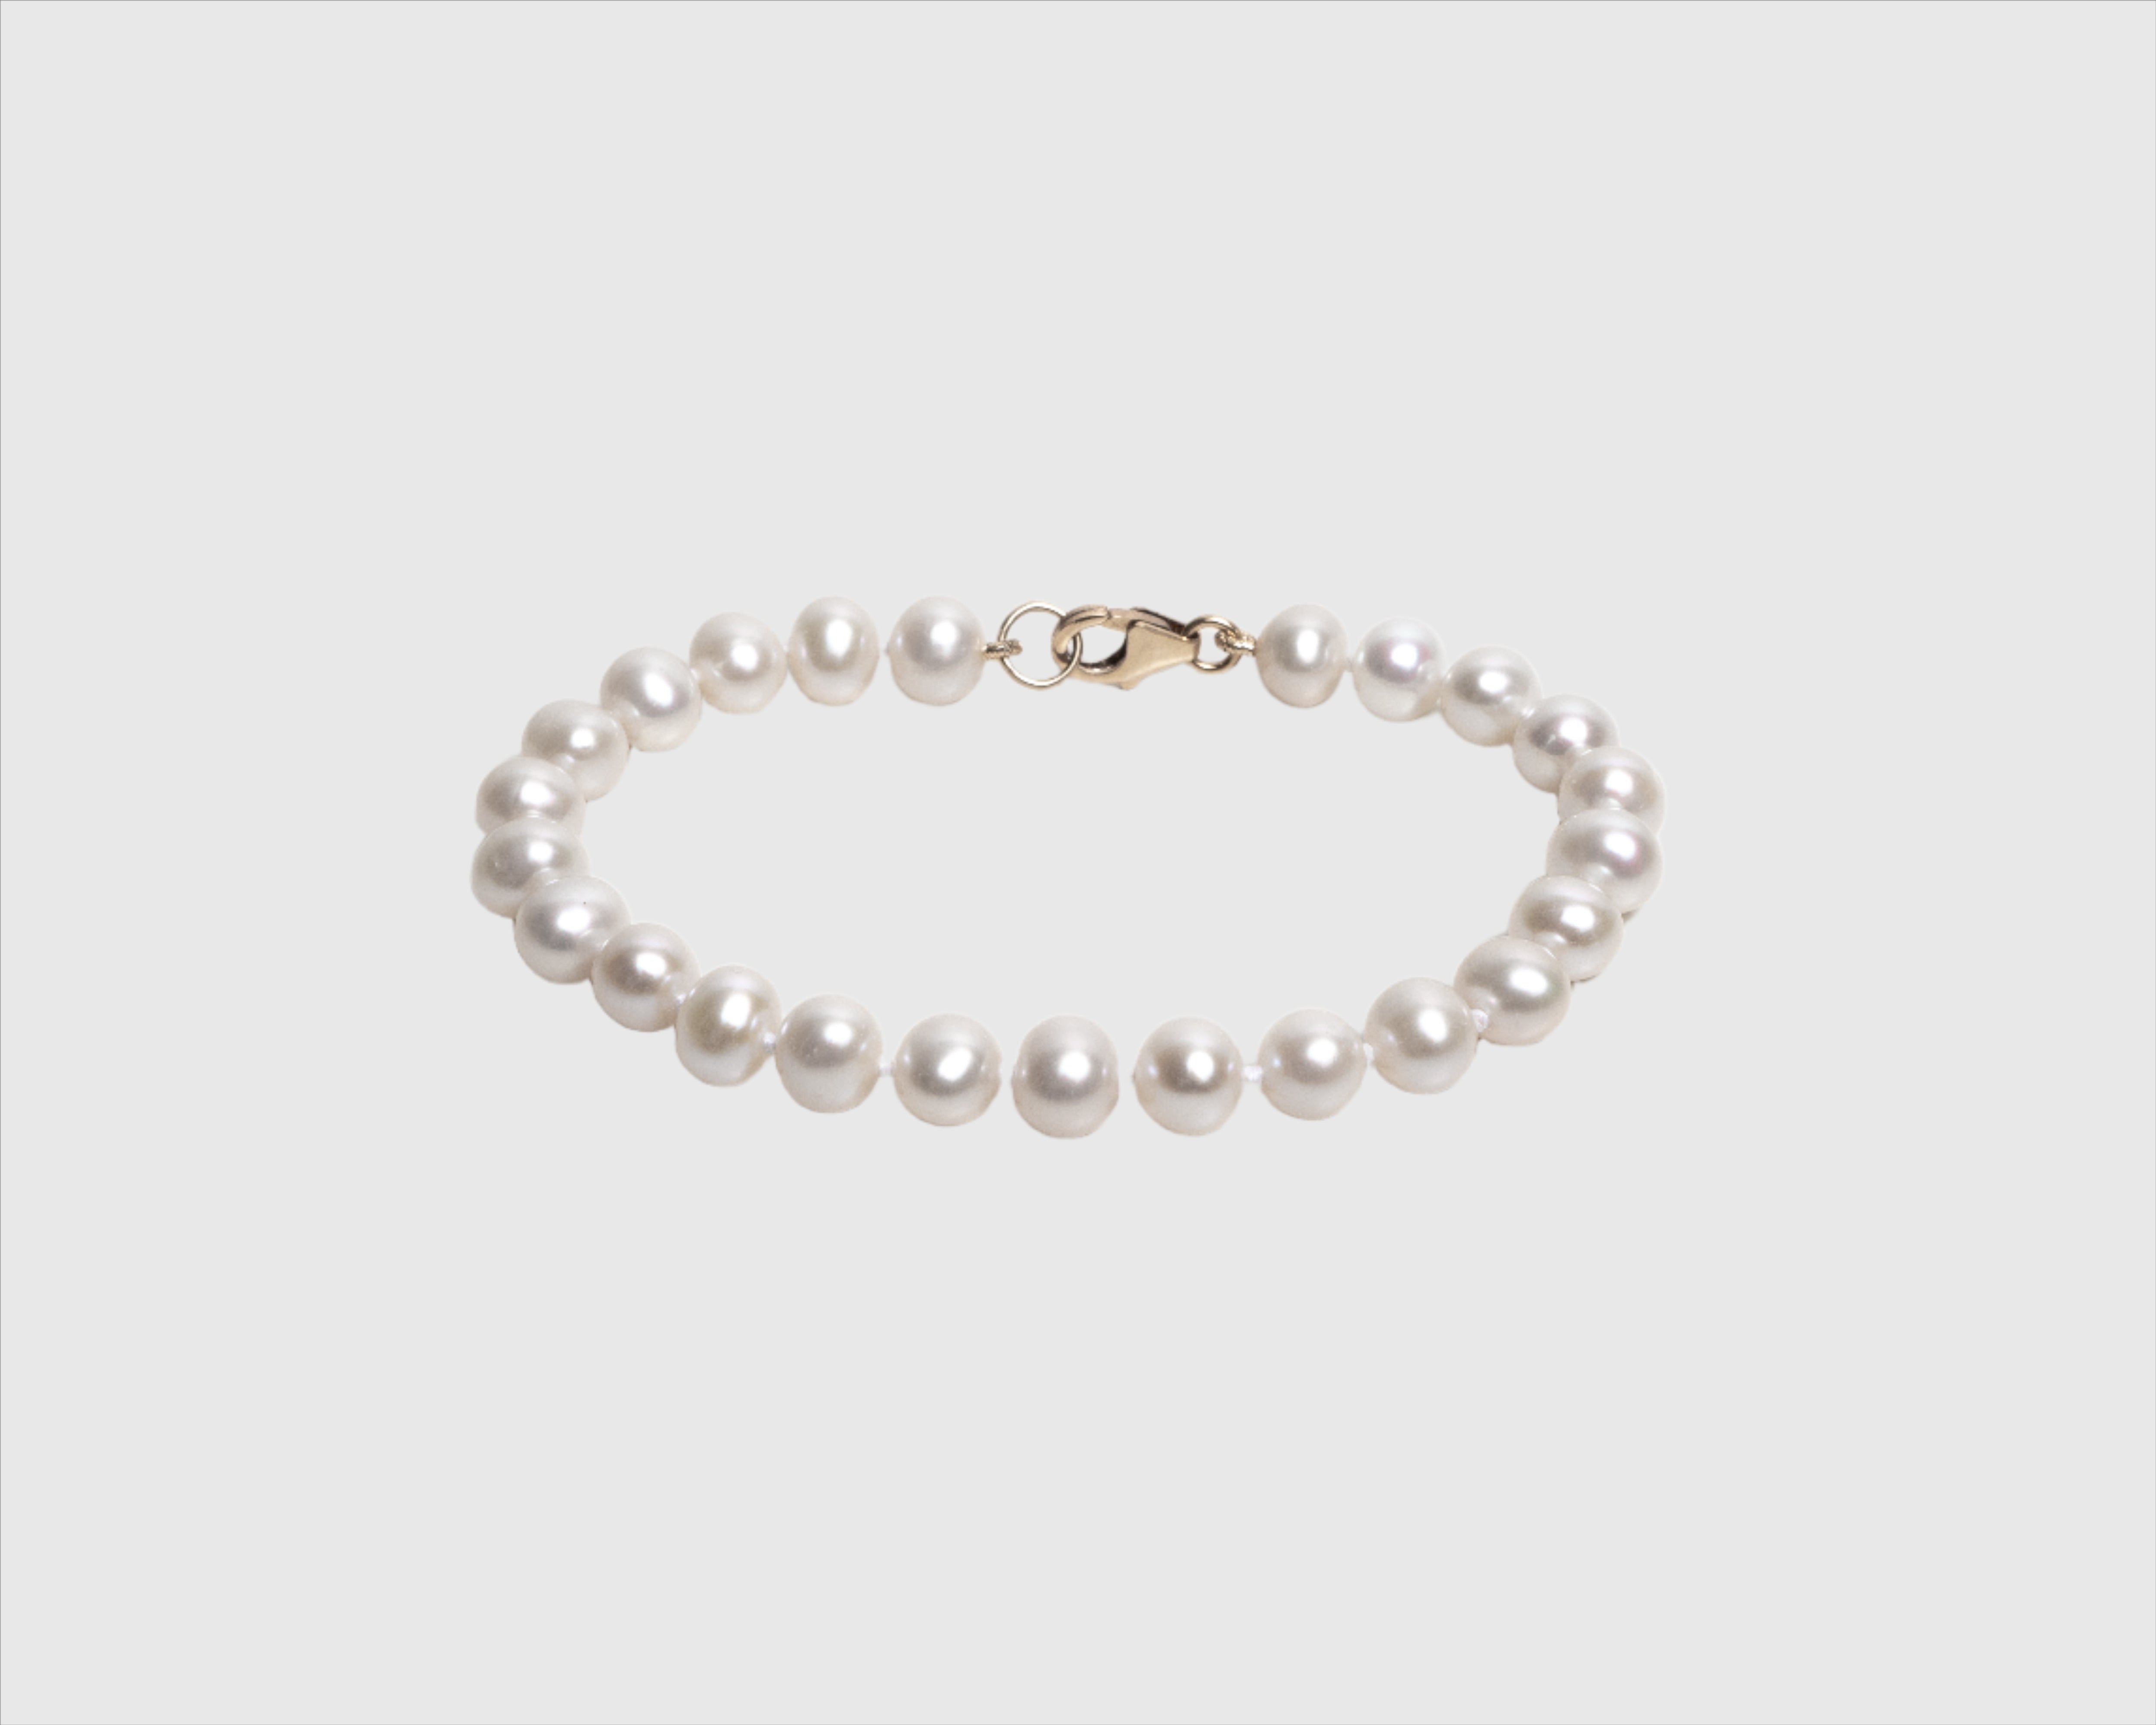 Rubber bracelet with white pearls